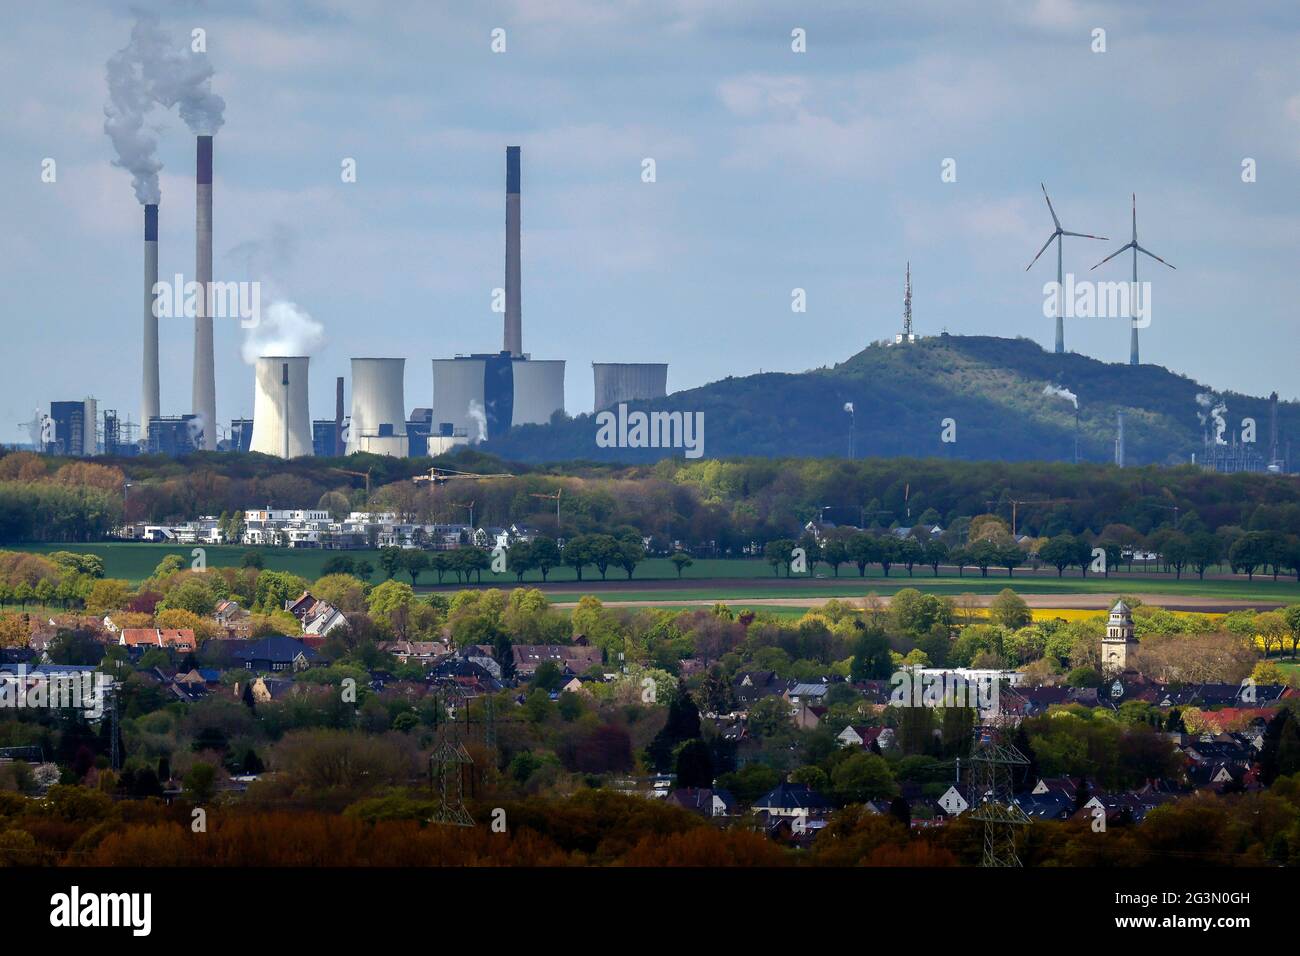 '07.05.2021, Gelsenkirchen, North Rhine-Westphalia, Germany - Uniper coal-fired power station Scholven next to the Oberscholven tailings pile with win Stock Photo